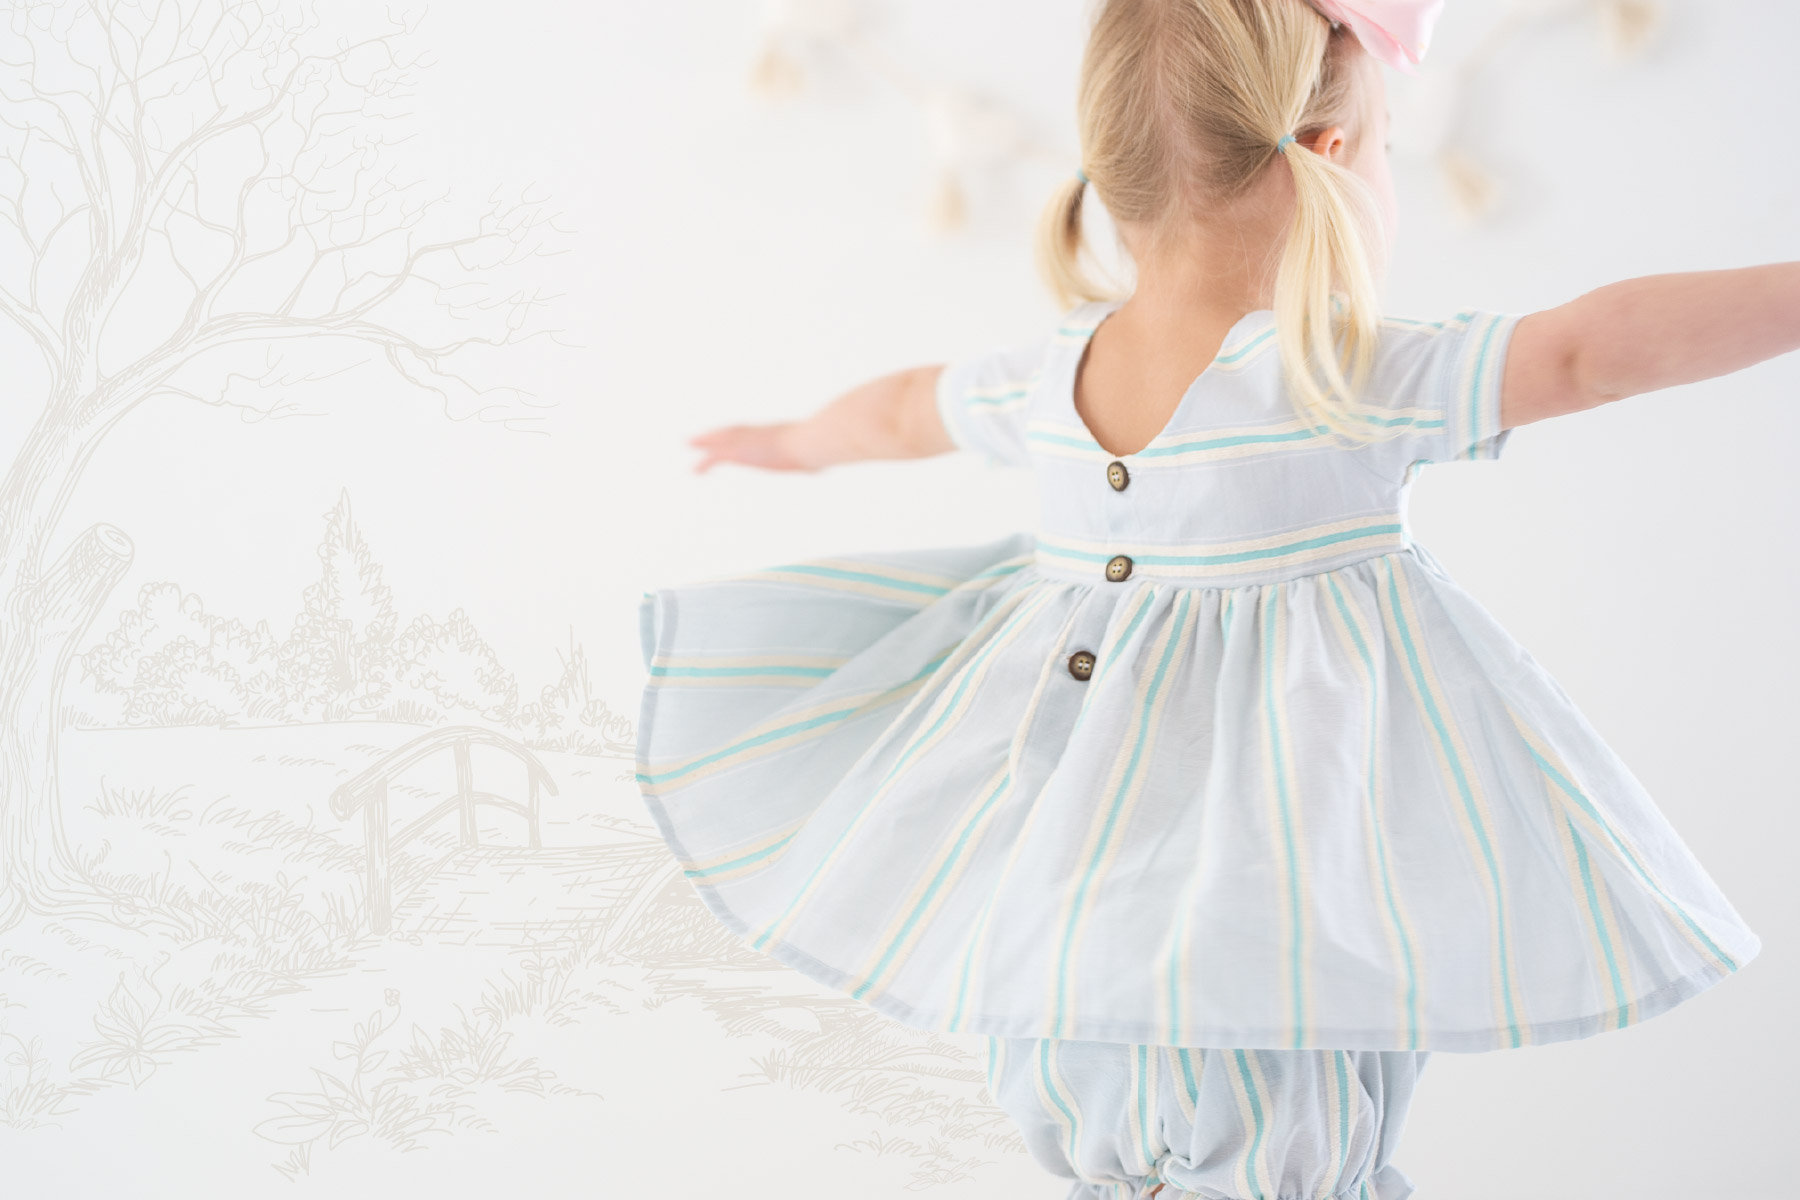 Young girl dancing in handmade light colored dress with tree illustrations in the background